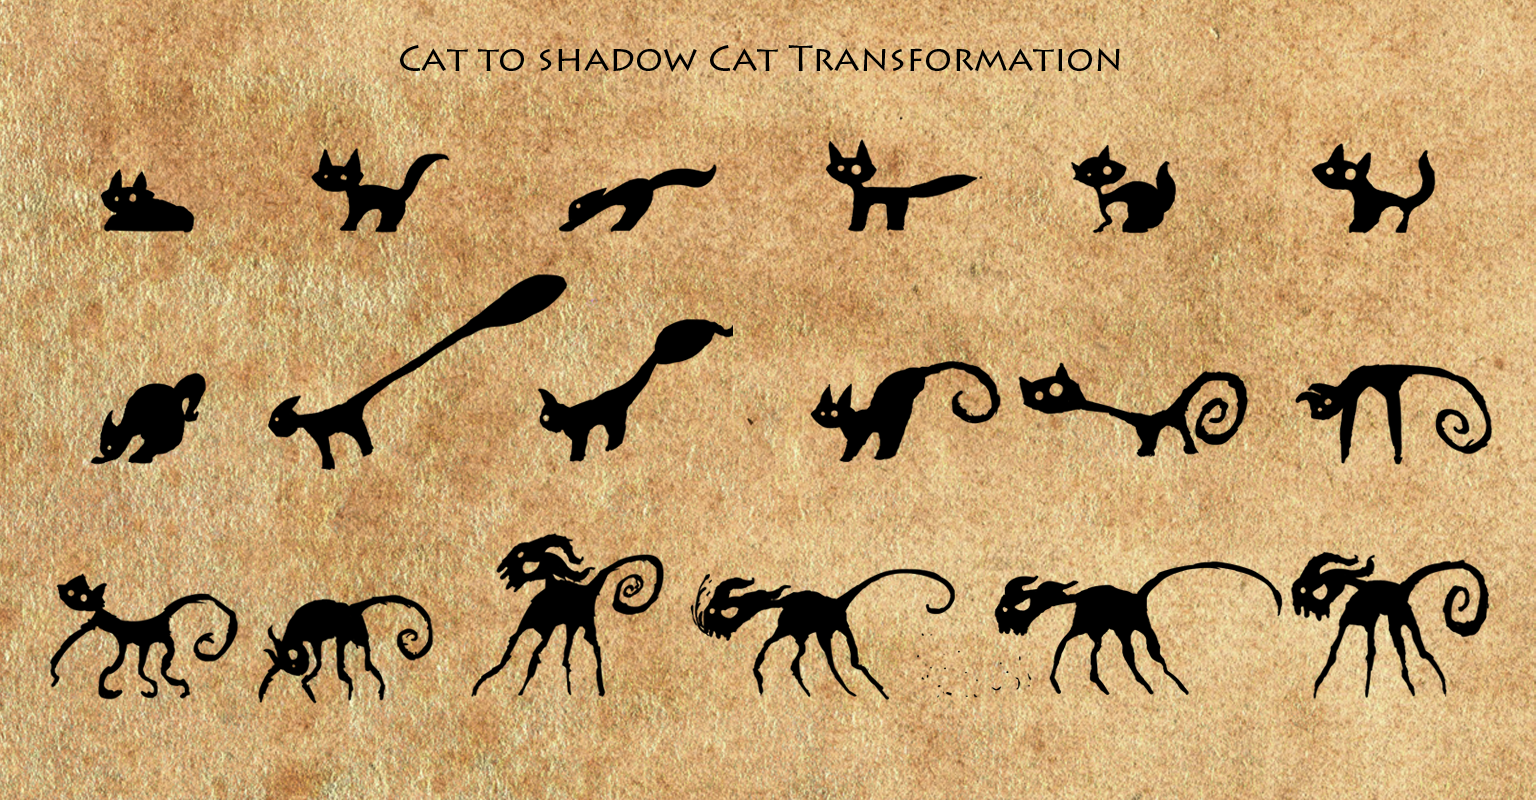 Frames from the Shadow Cat's transformation.